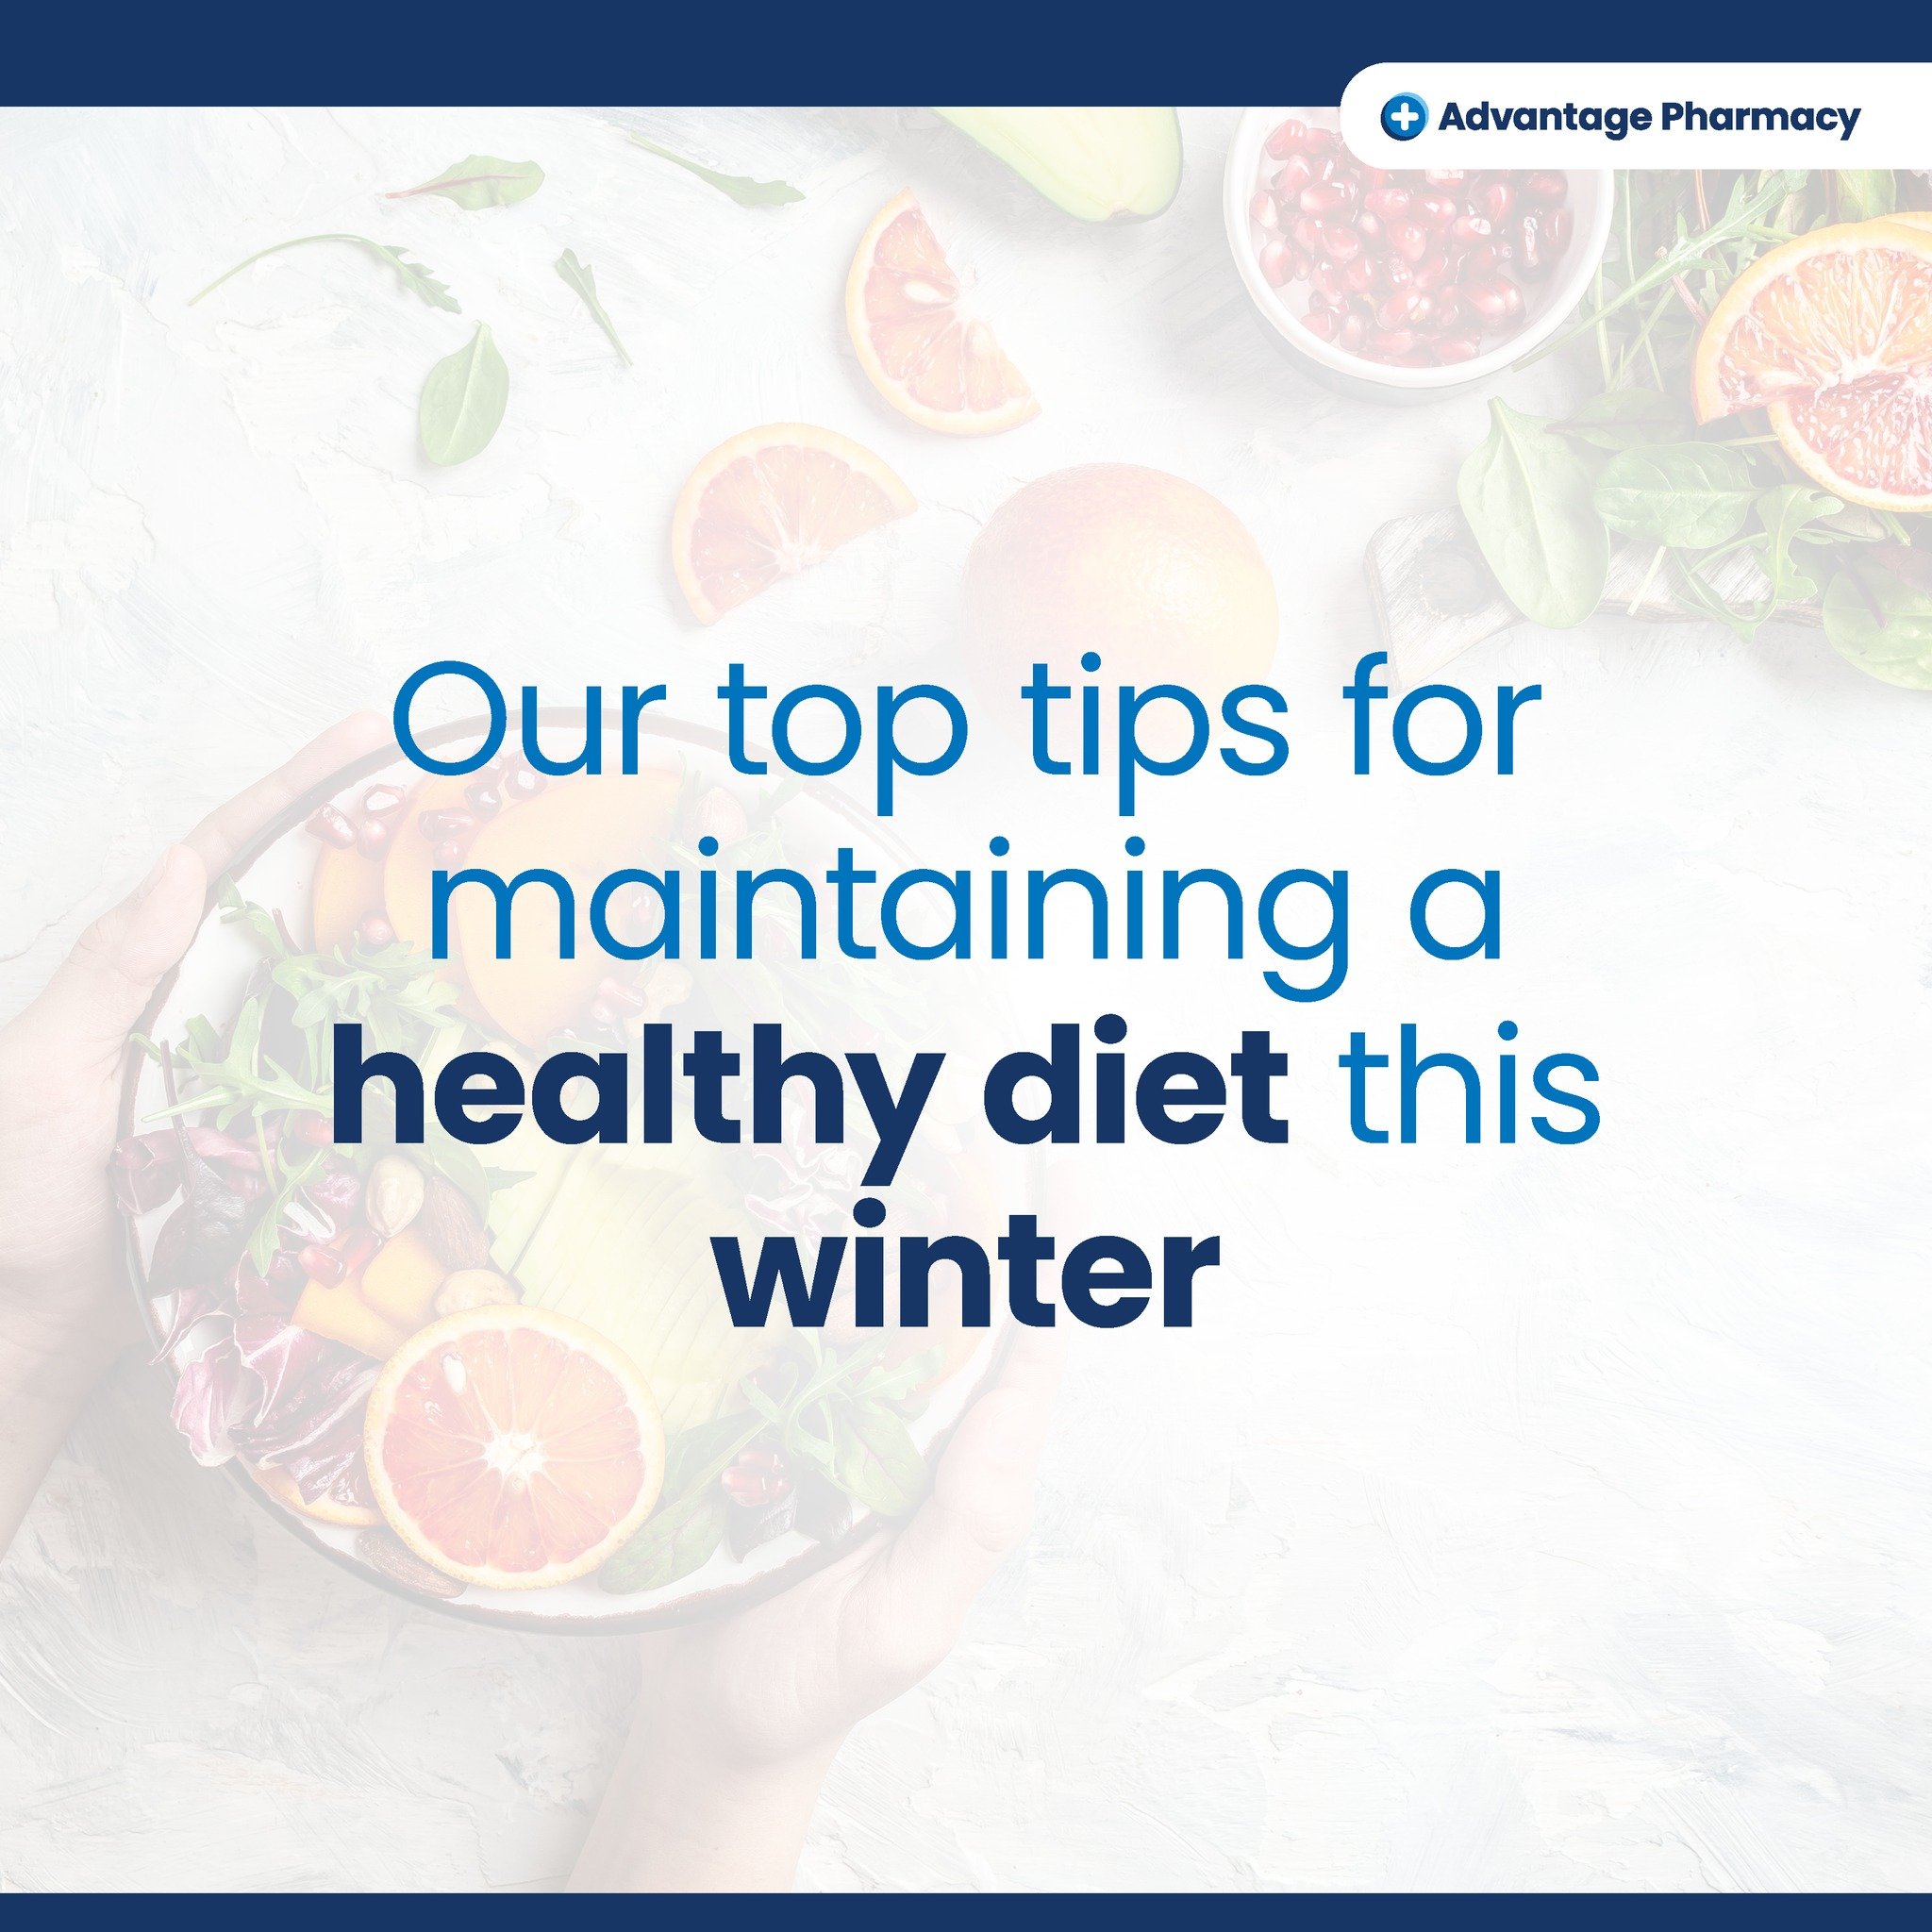 Once the weather begins to get cooler and the nights start earlier, it can be easy to tuck into unhealthy snacks and get into bad eating habits. 🌧☔️
So, we have some tips on how to maintain a healthy diet for these cooler months ahead:
Complex carbs